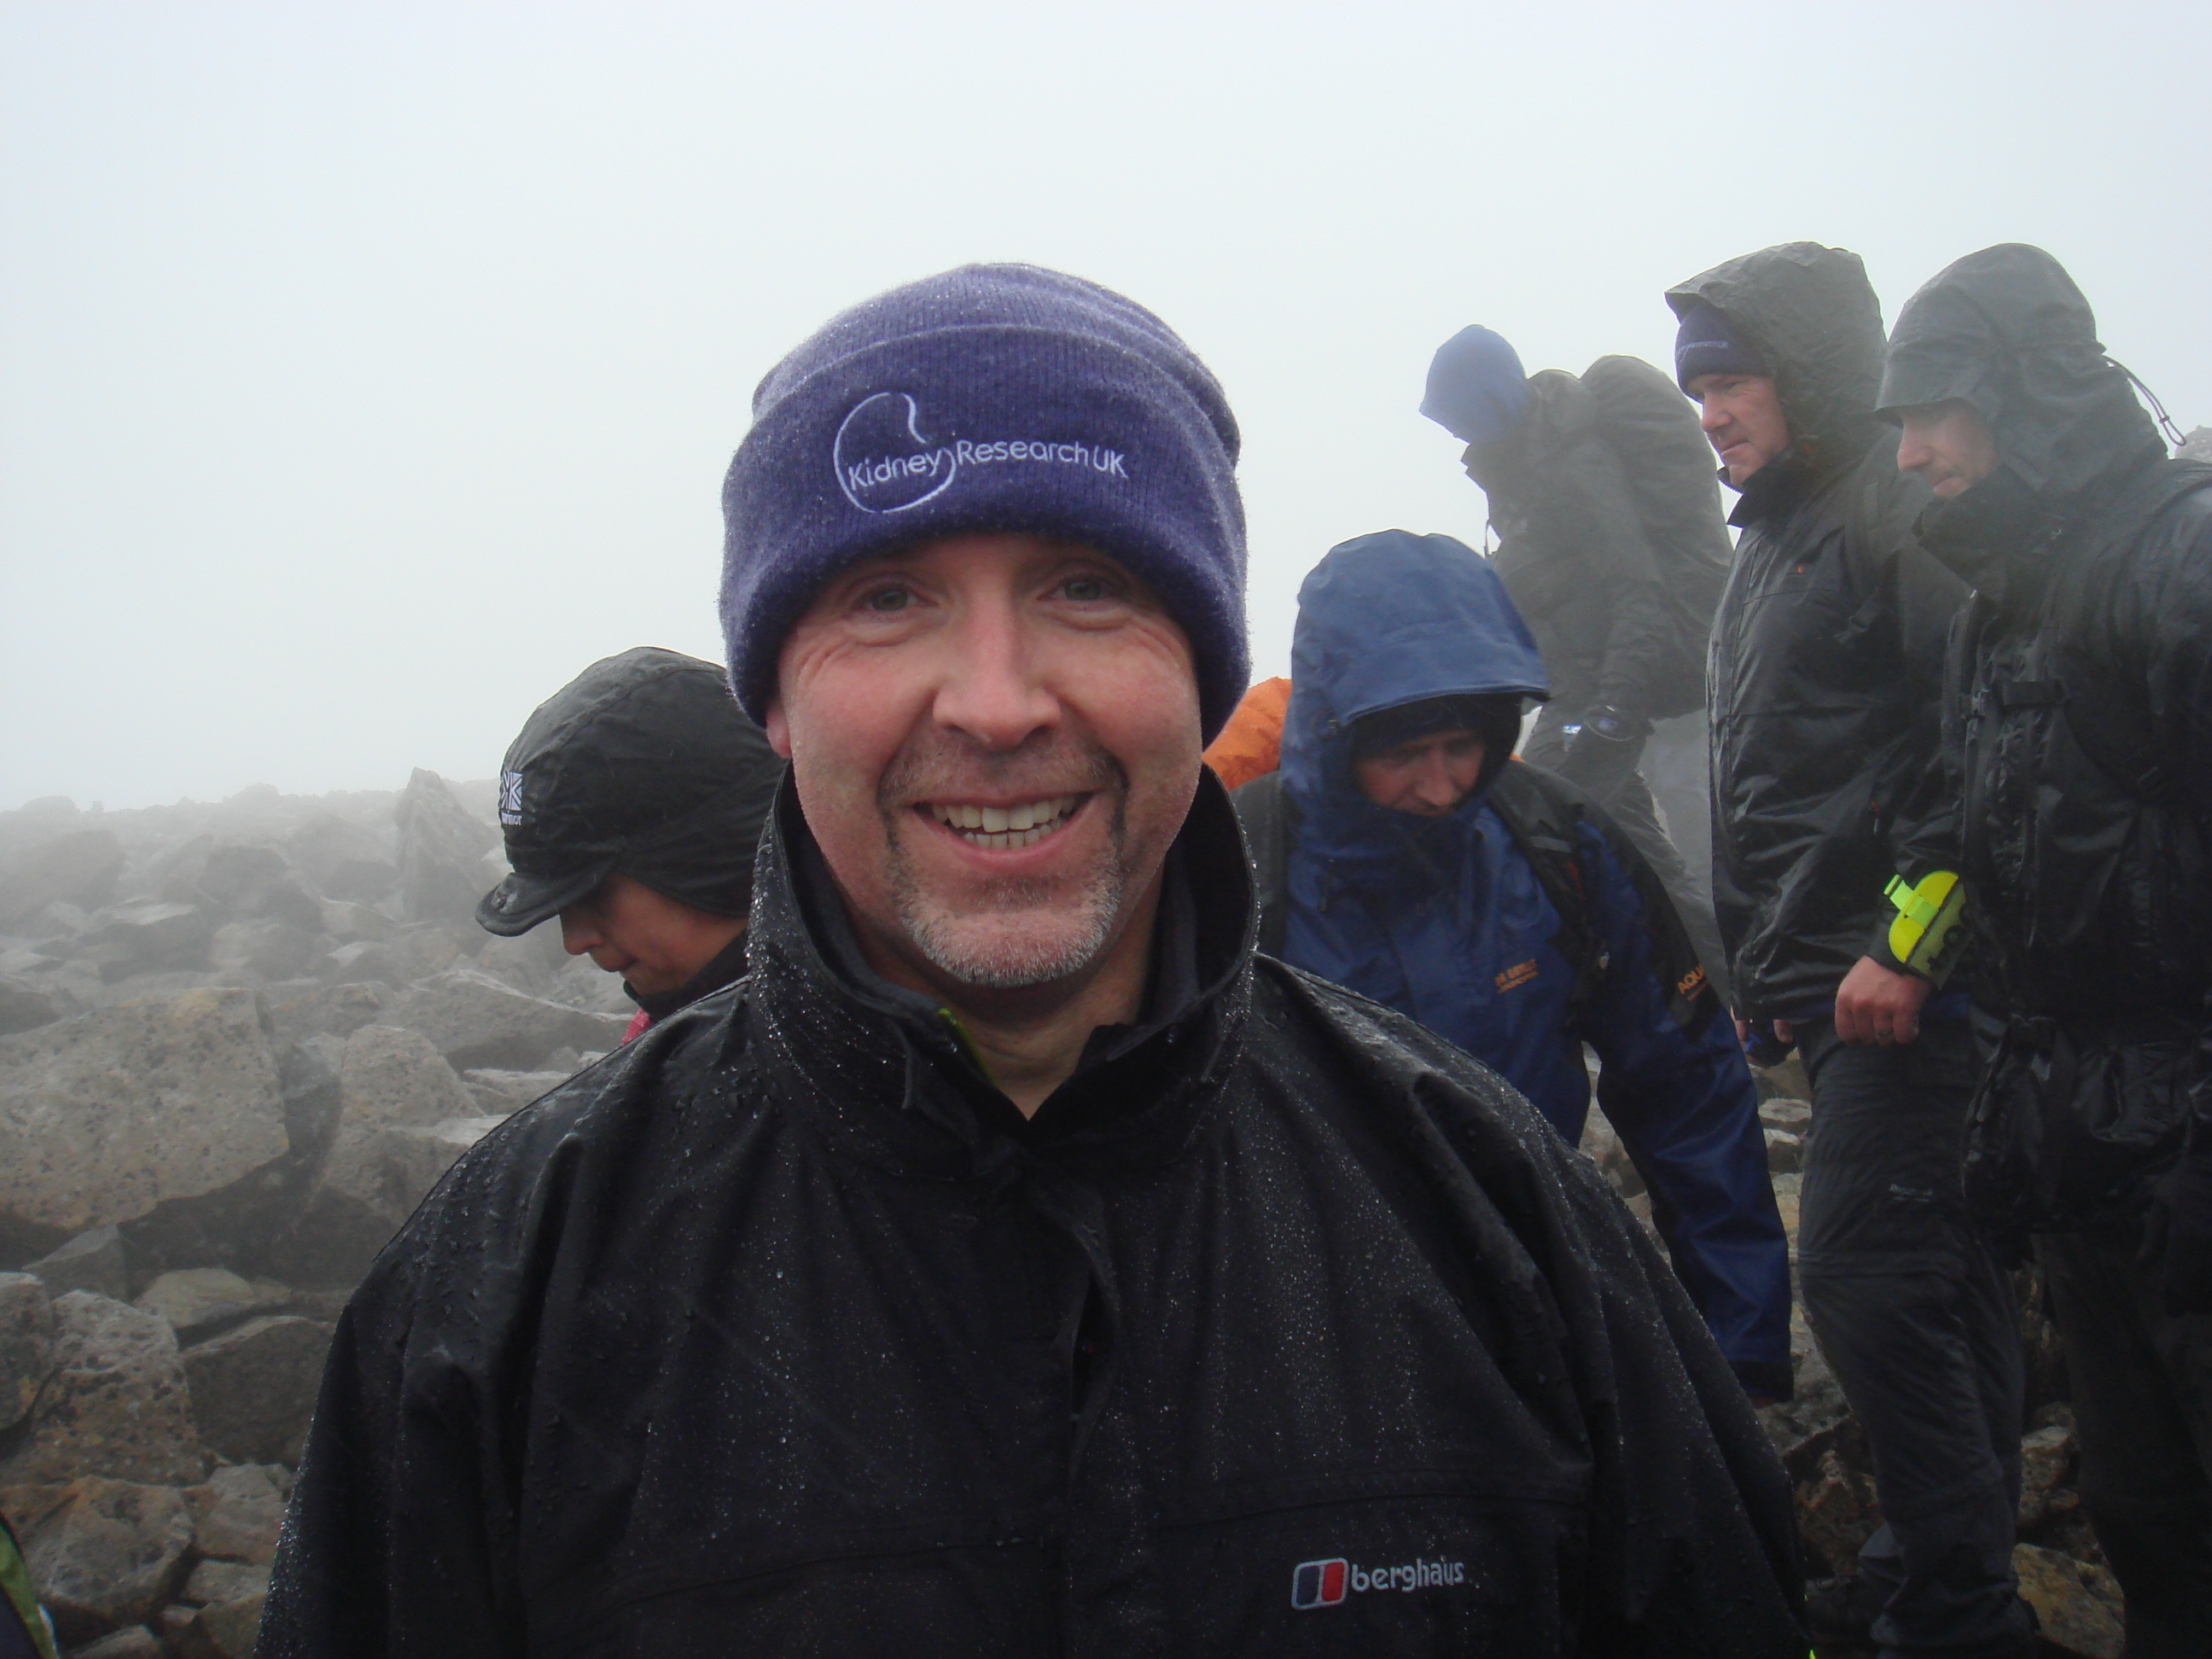 Tom Sheehy looks delighted to have made it to the top